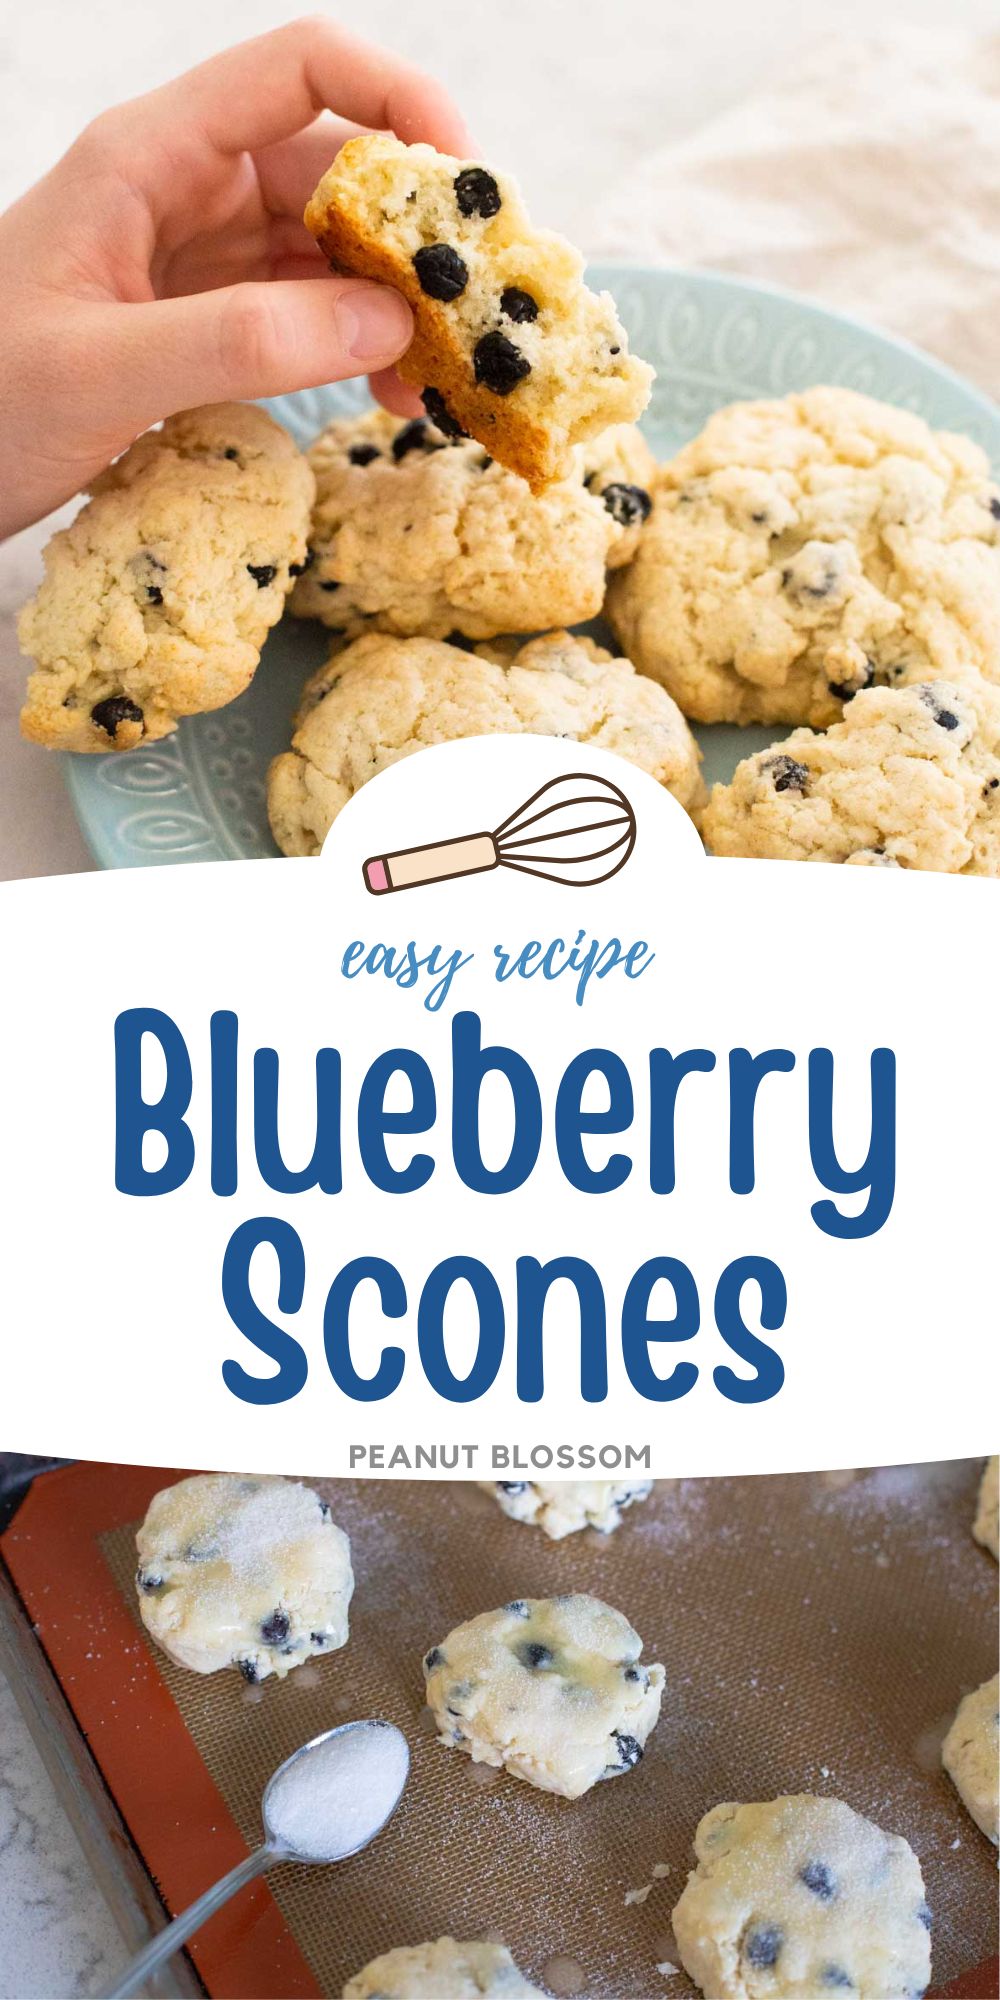 The photo collage shows a blueberry scone broken open to show the inside next to the scones on a baking pan being sprinkled with sugar.